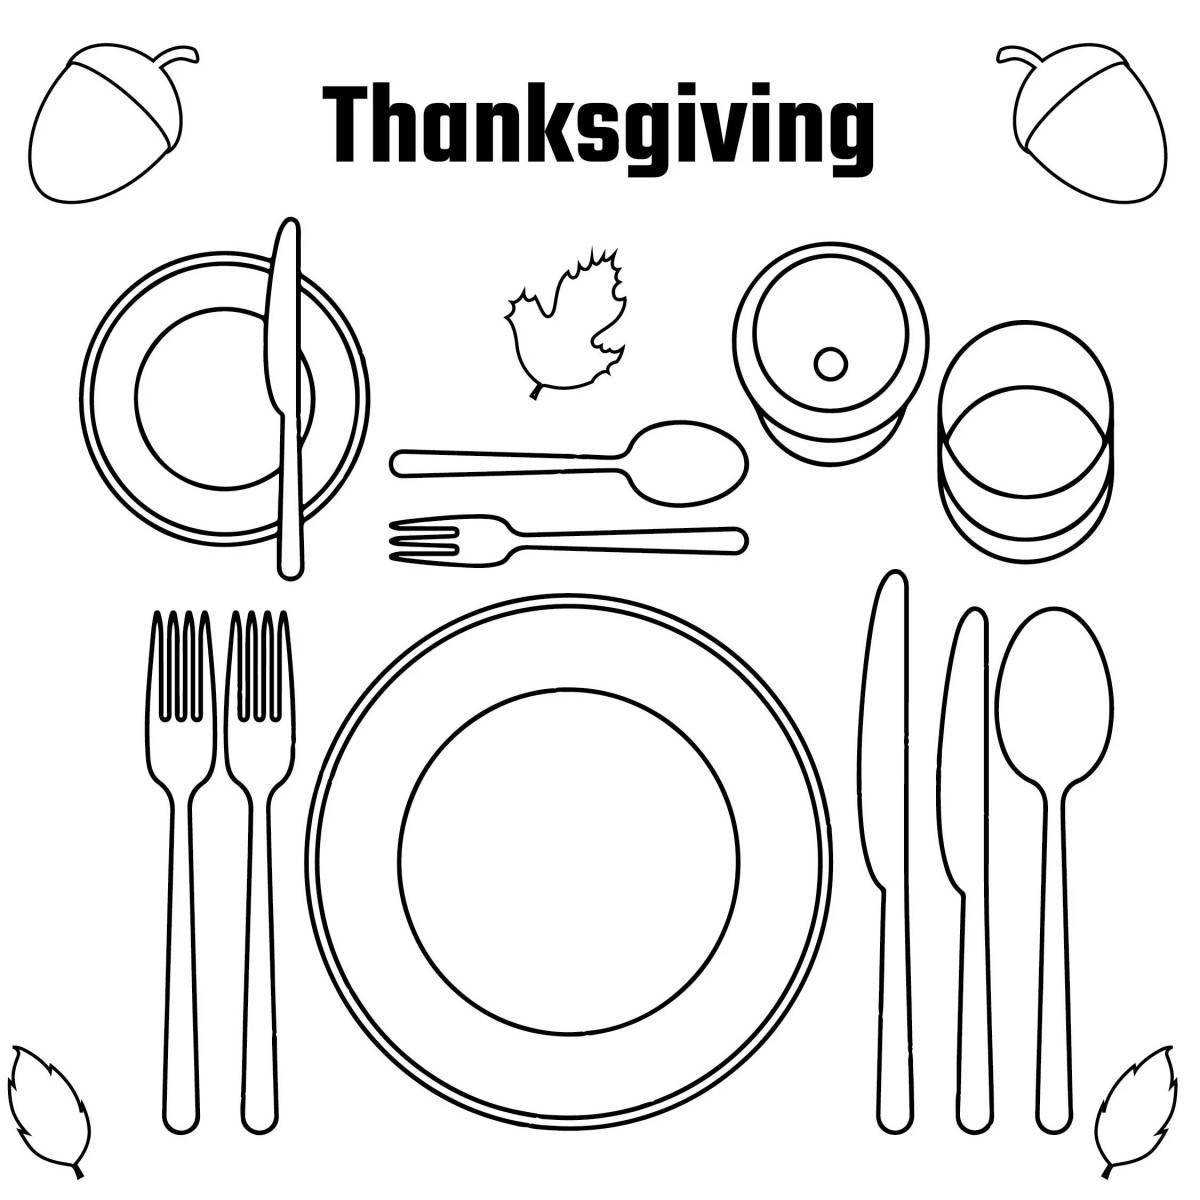 Playful table setting coloring book for children